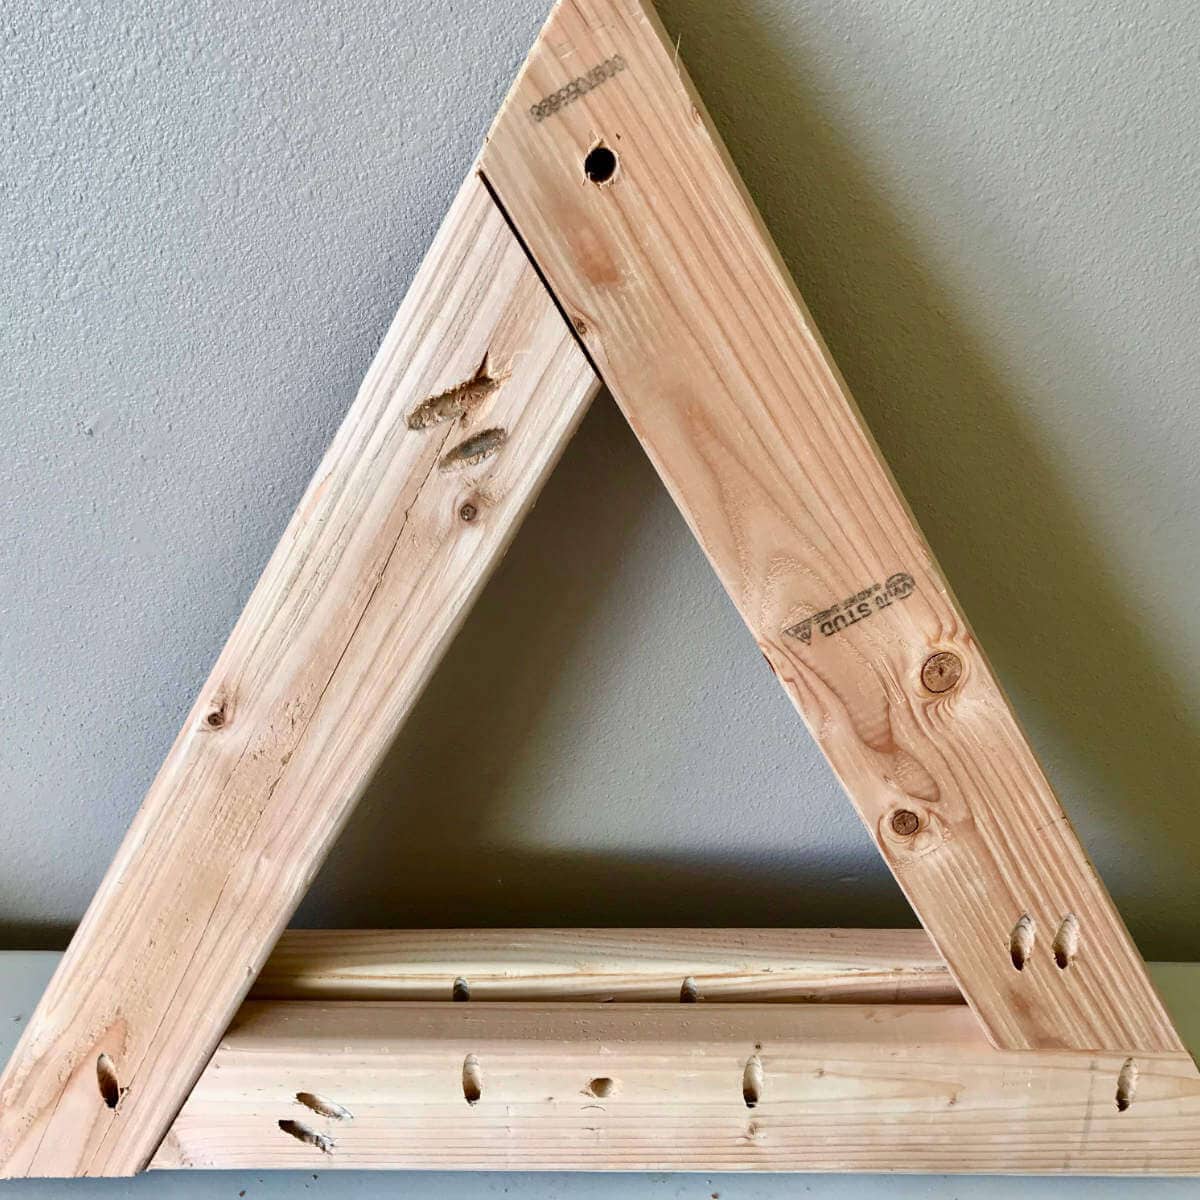 Triangle leg built out of 2 x 4s and pocket holes.